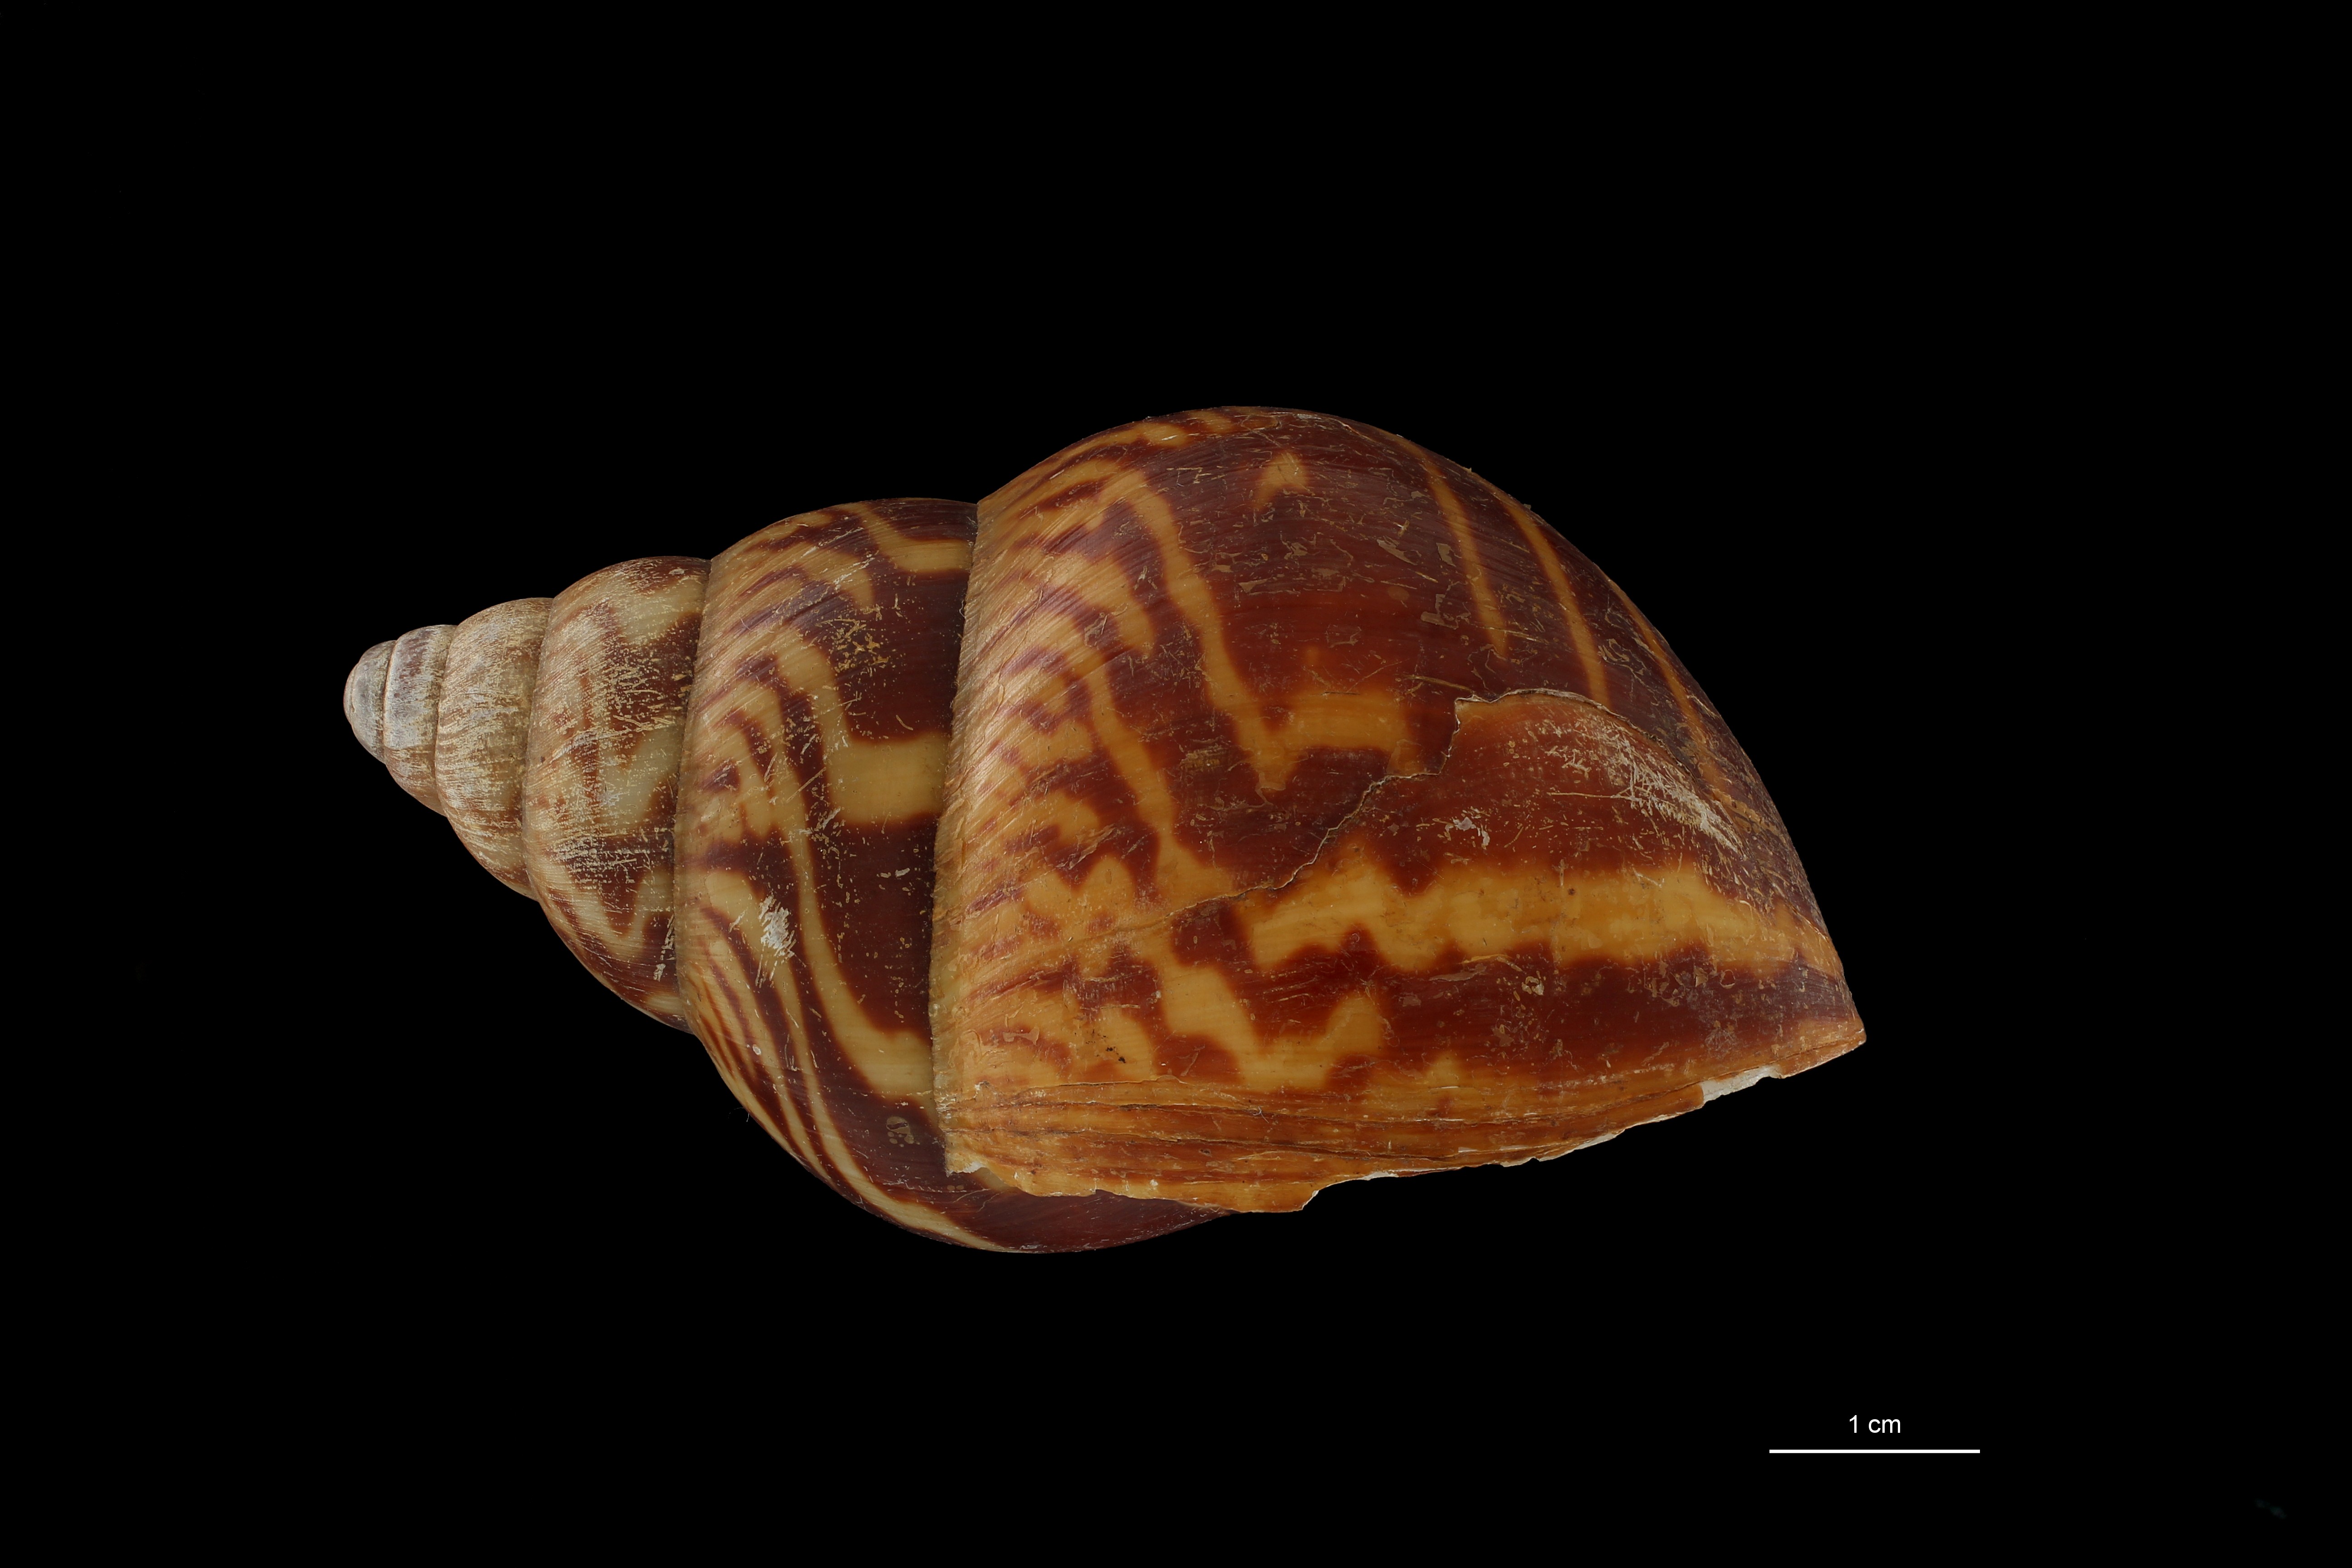 BE-RBINS-INV PARATYPE MT 184 Achatina weynsi var. obesa LATERAL ZS DMap Scaled.jpg